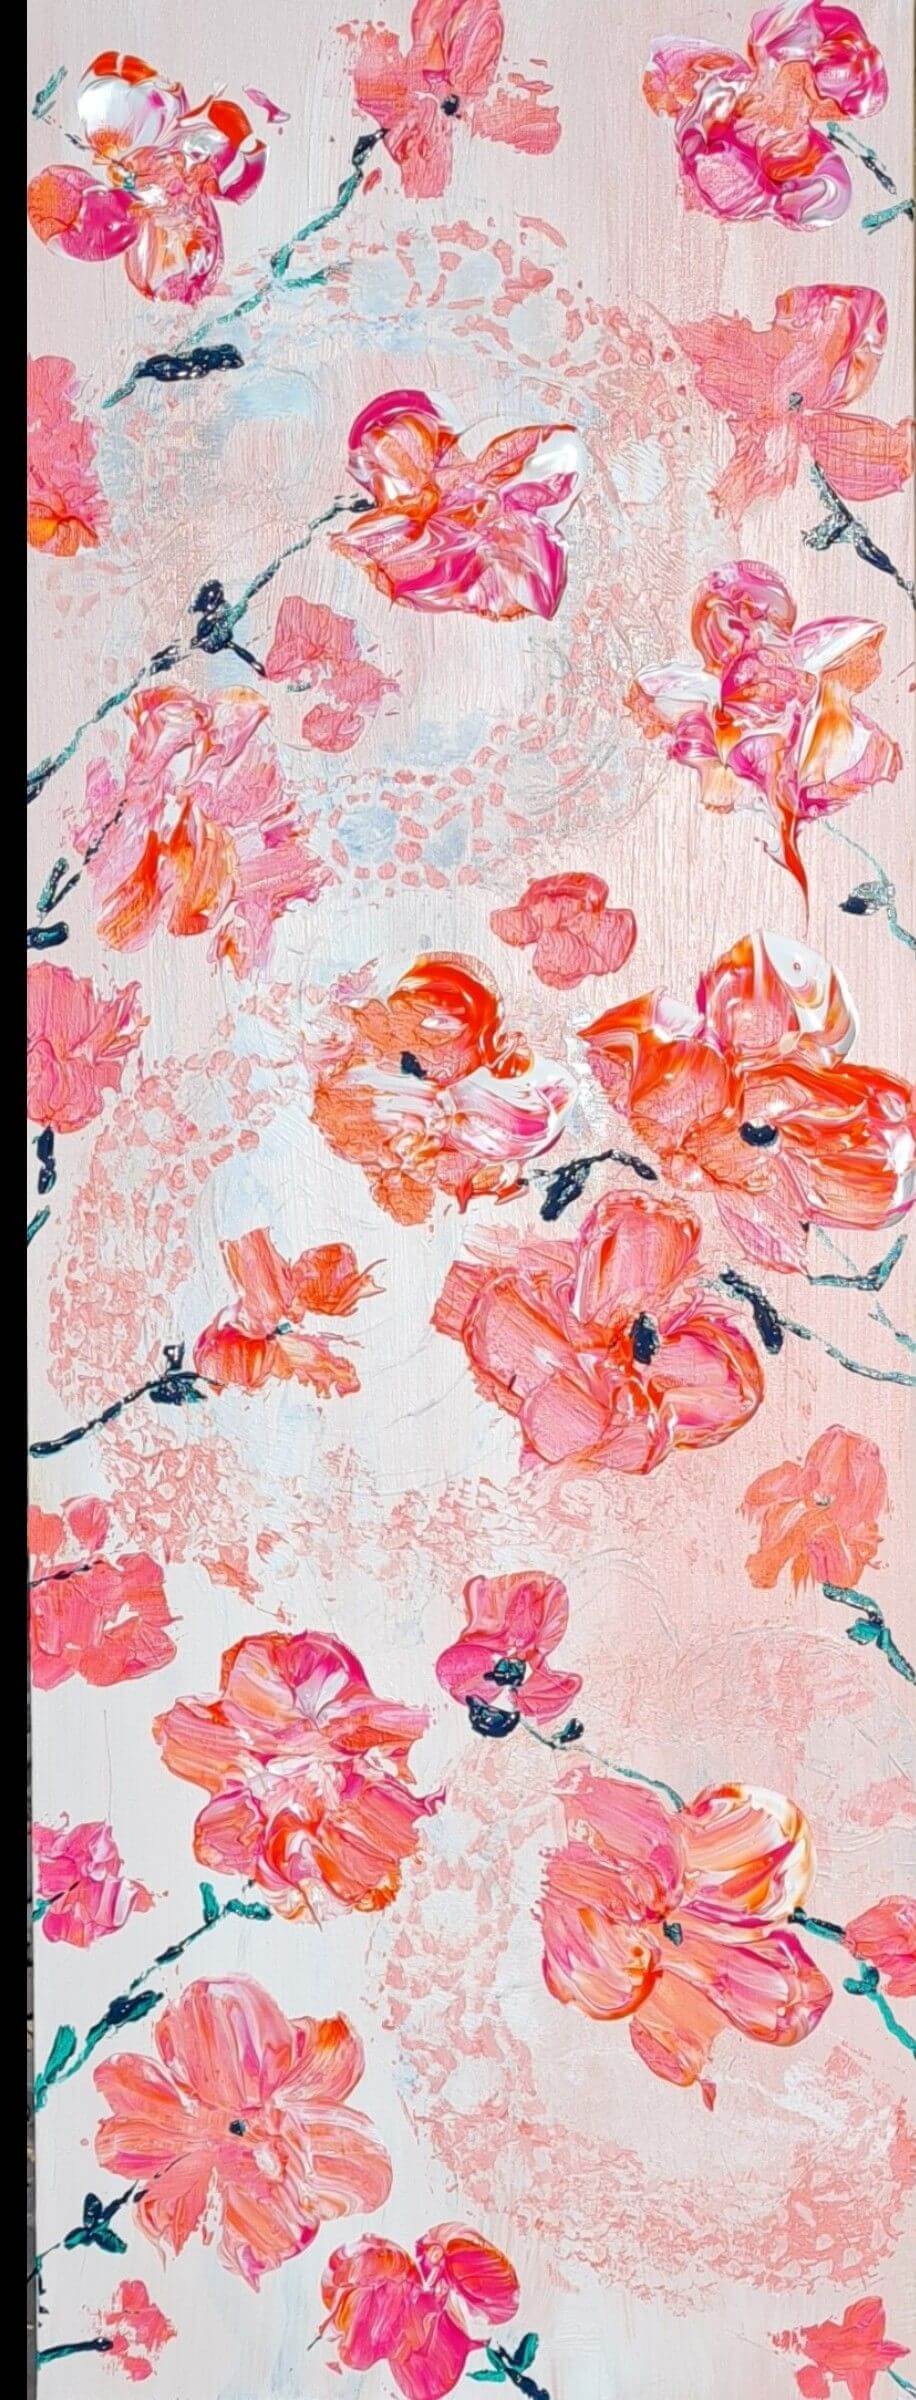 Peach floral abstract